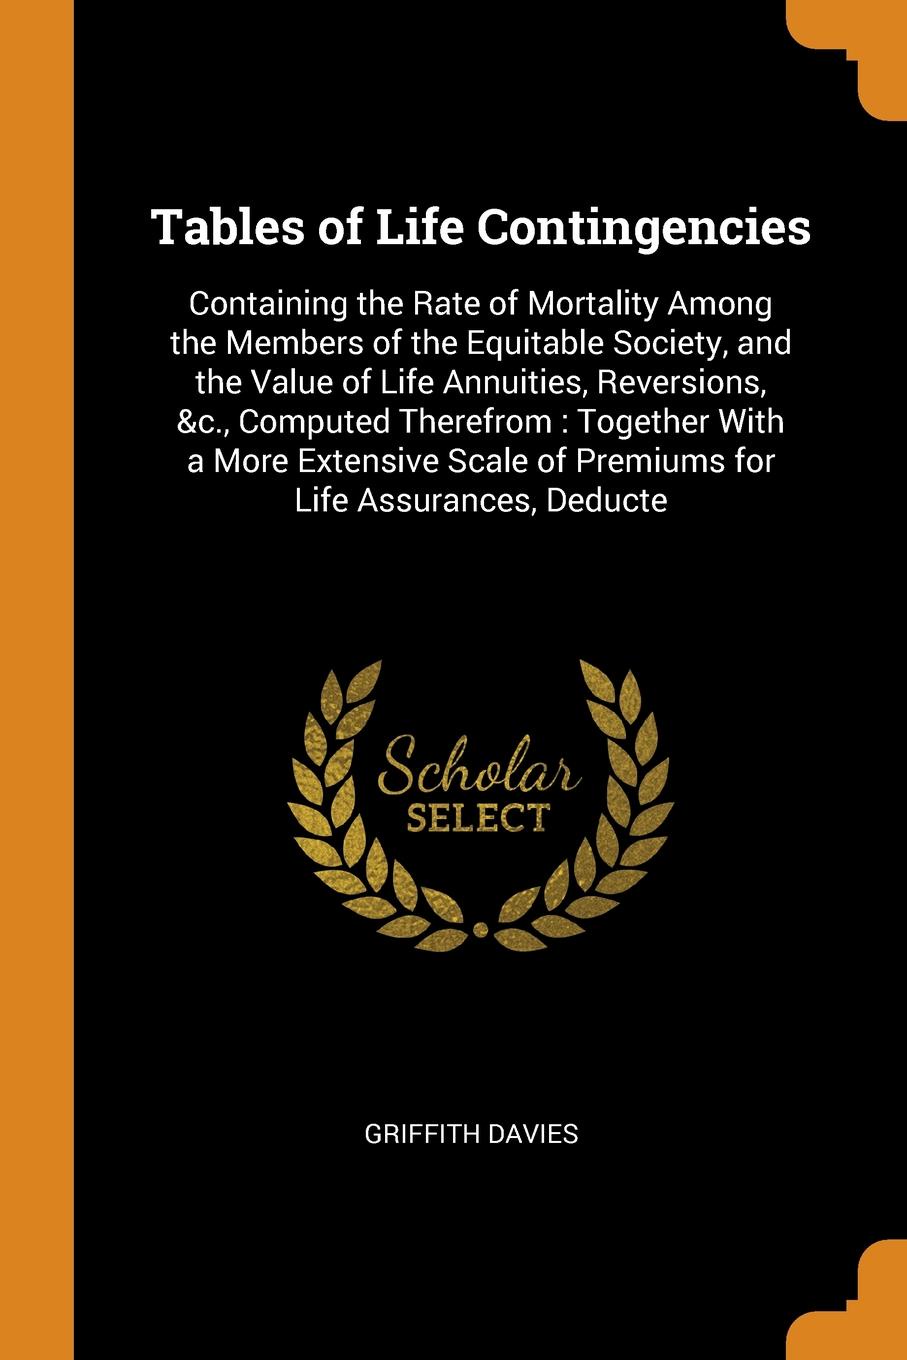 Tables of Life Contingencies. Containing the Rate of Mortality Among the Members of the Equitable Society, and the Value of Life Annuities, Reversions, &c., Computed Therefrom : Together With a More Extensive Scale of Premiums for Life Assurances,...